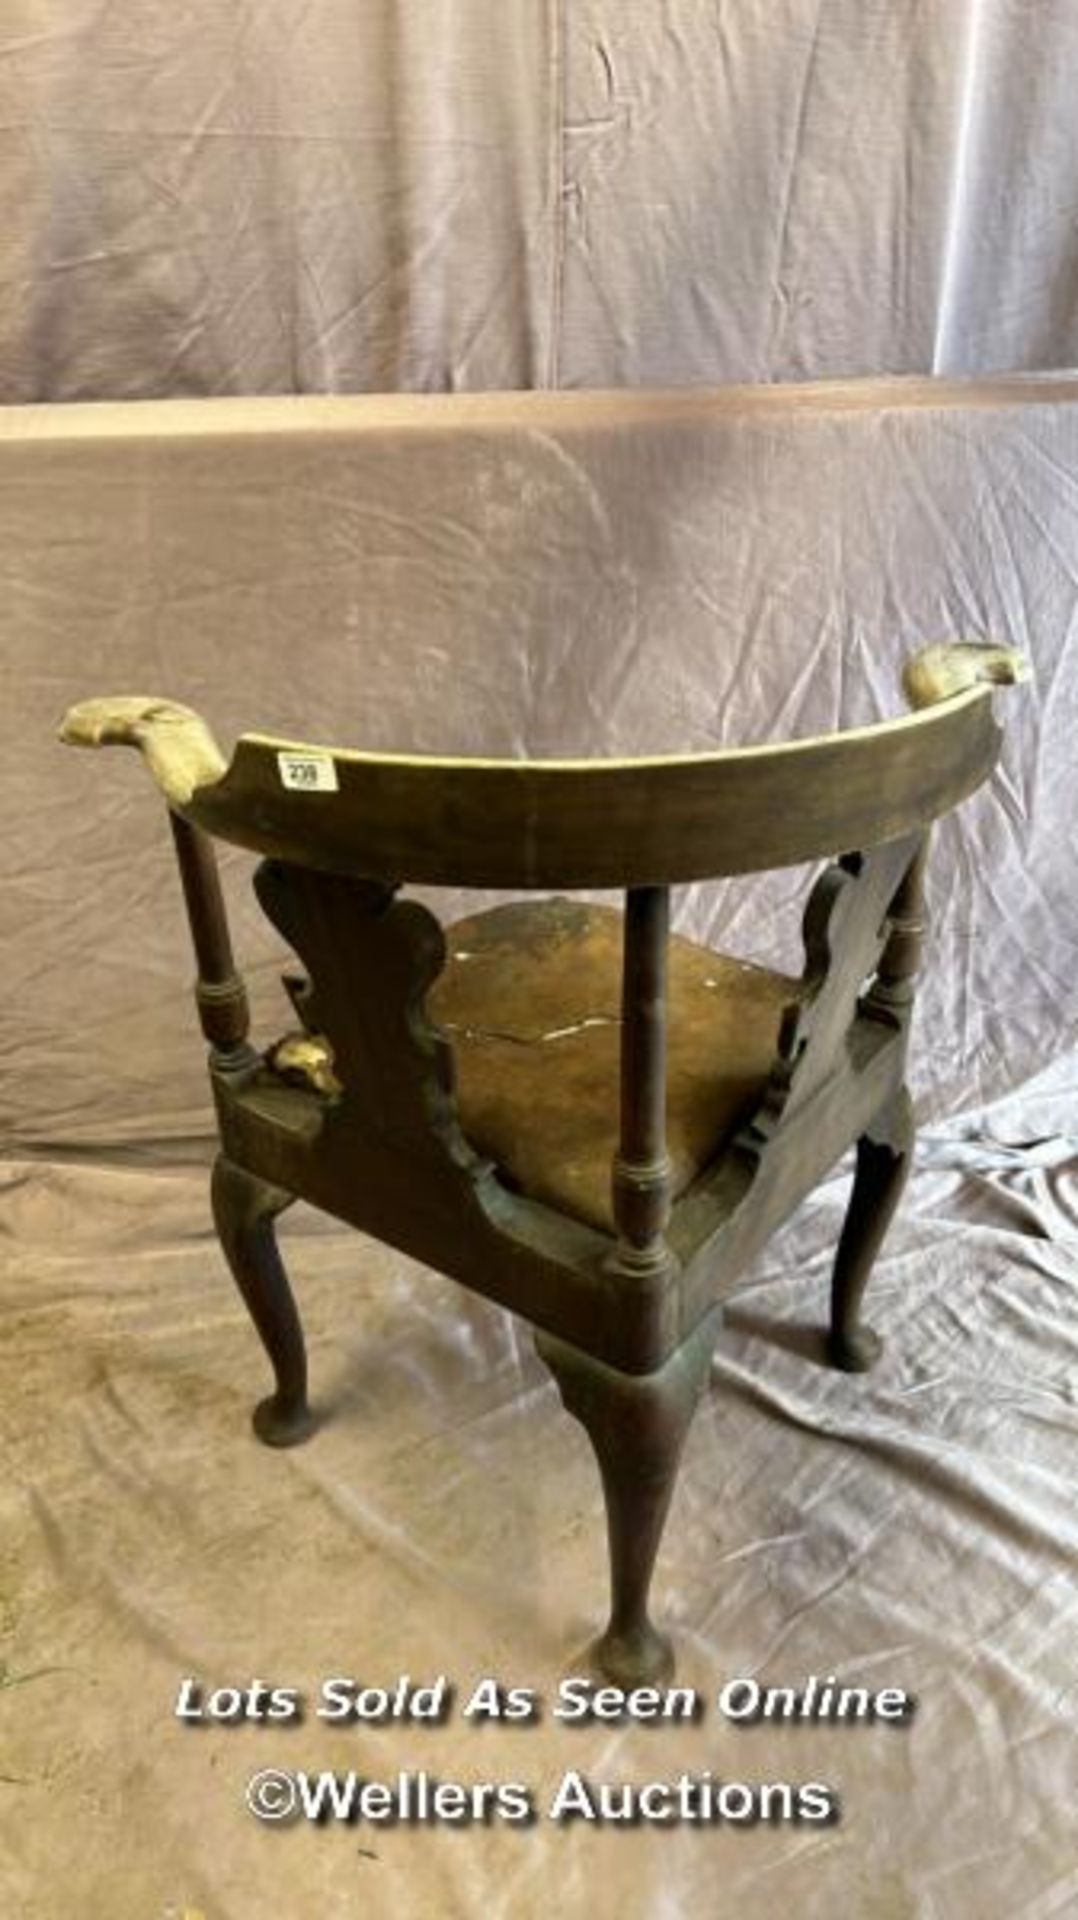 18TH CENTURY CORNER CHAIR, WITH SHELL MOTIF ON CABRIOLE LEGS, ORIGINAL LEATHER PADDED SEAT (IN - Image 5 of 5